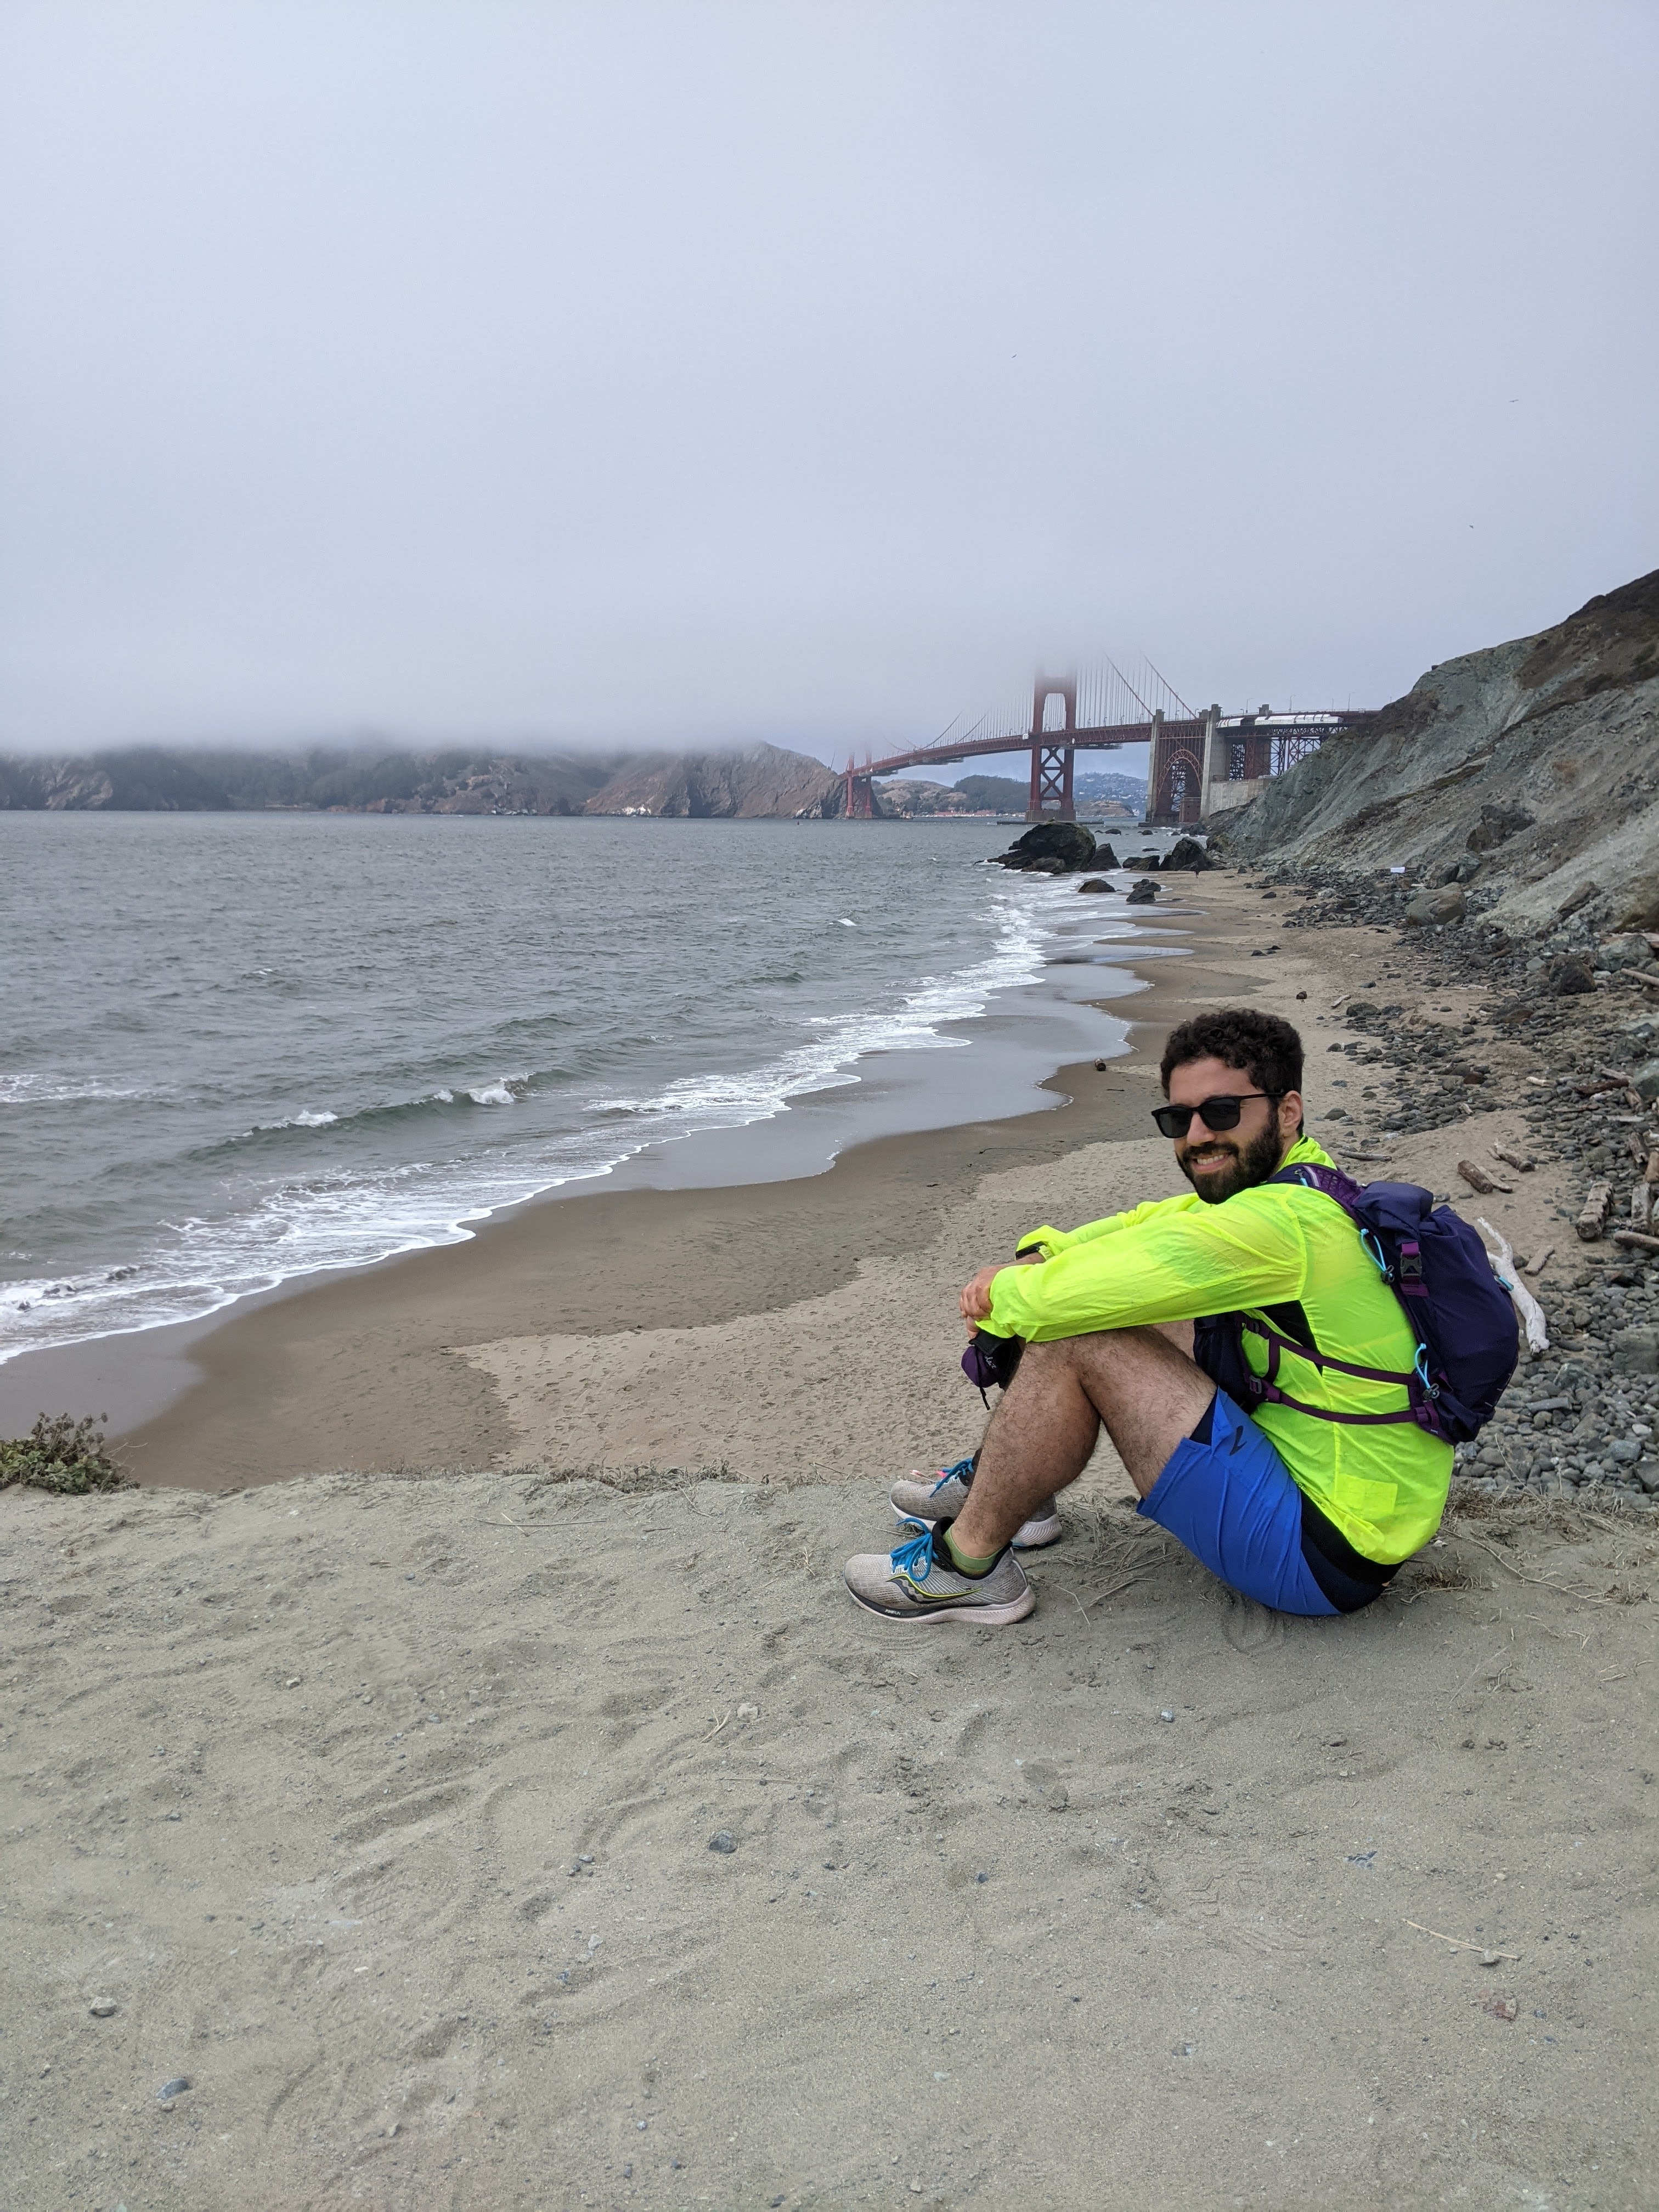 Me in a neon yellow windbreaker, sunglasses, and a hydration vest, sitting on a beach. In the distance is the Golden Gate Bridge, shrouded in fog.